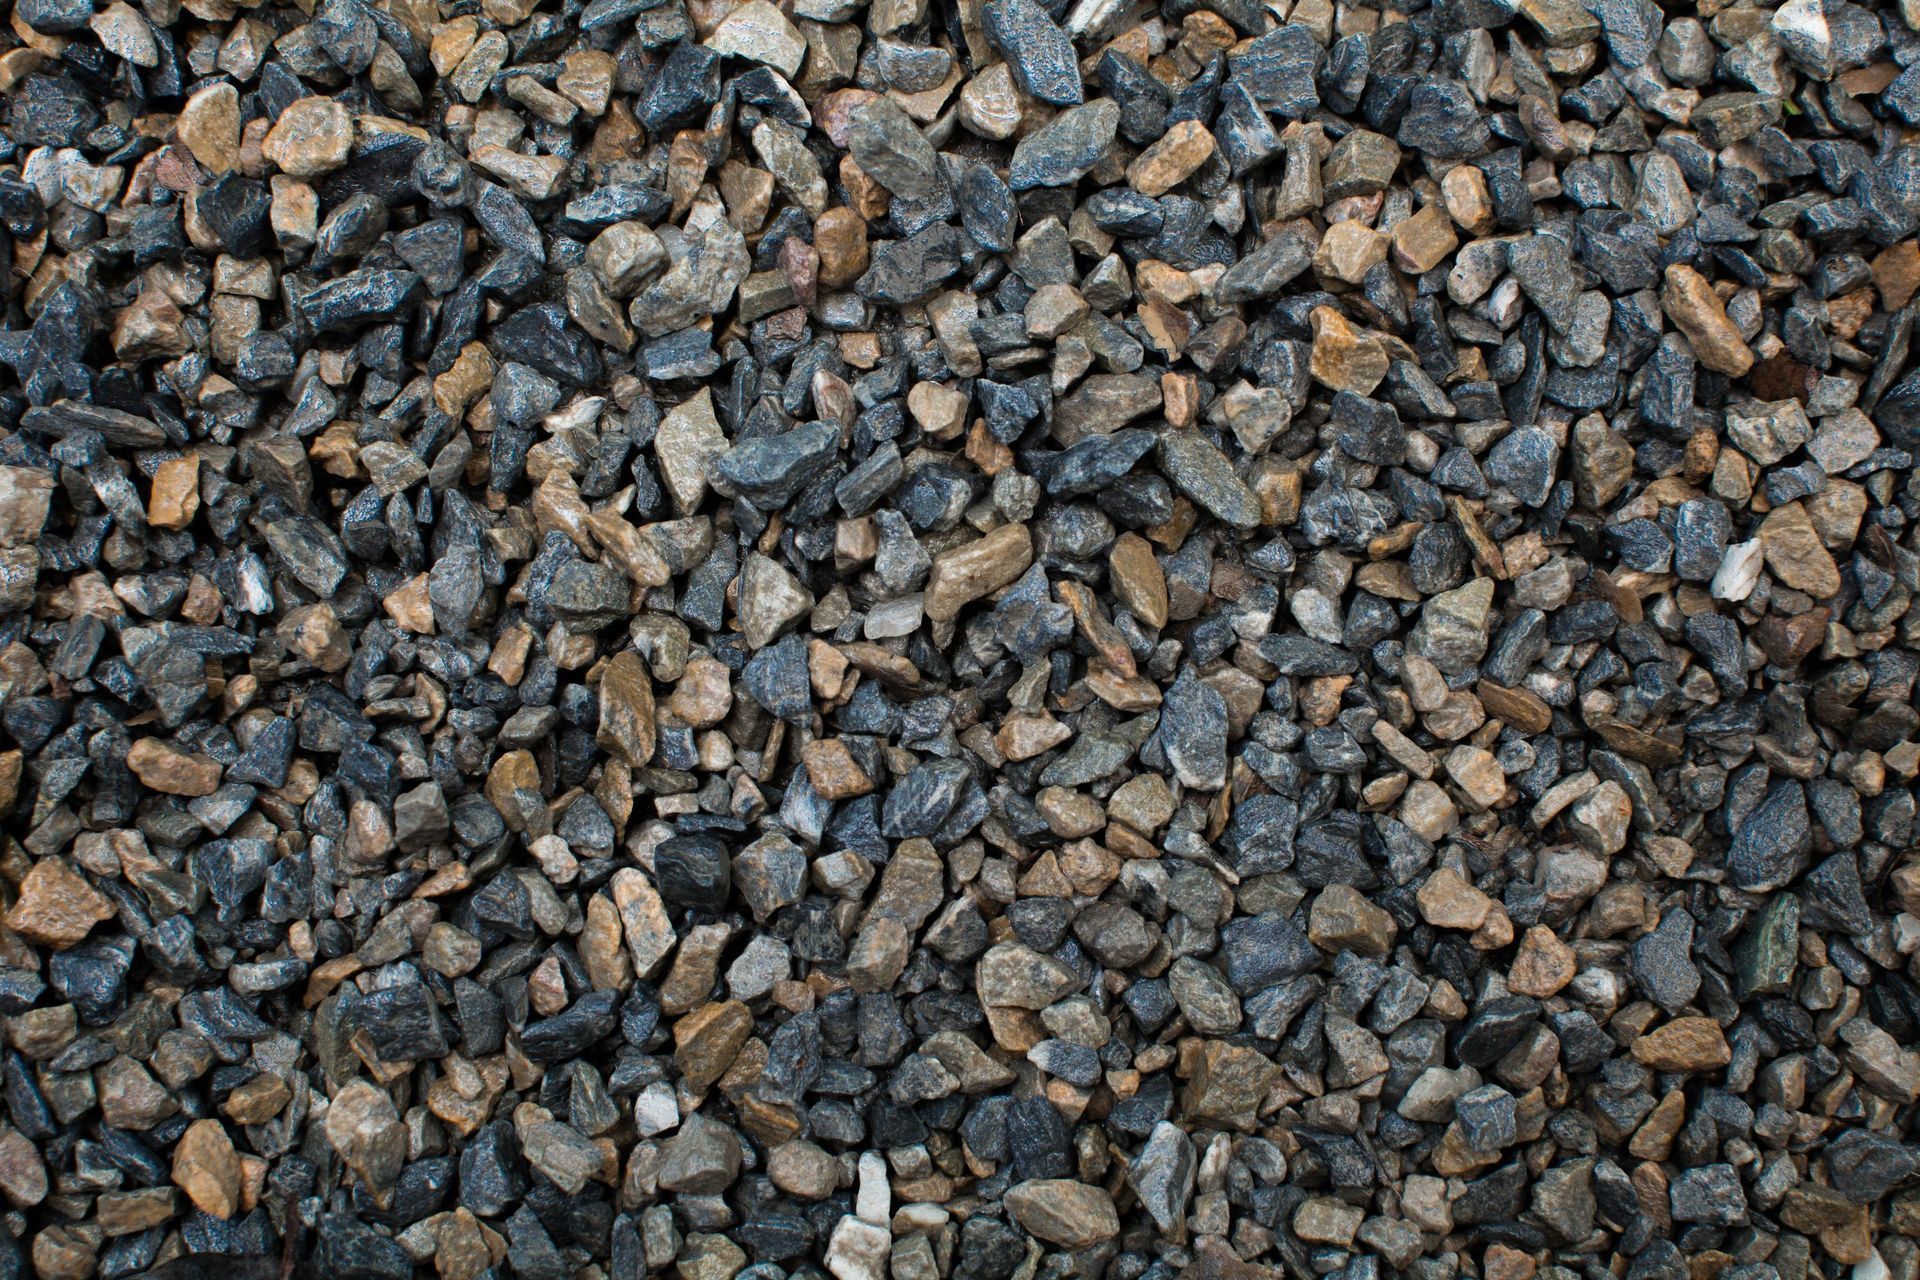 A pile of gravel is sitting on the ground.